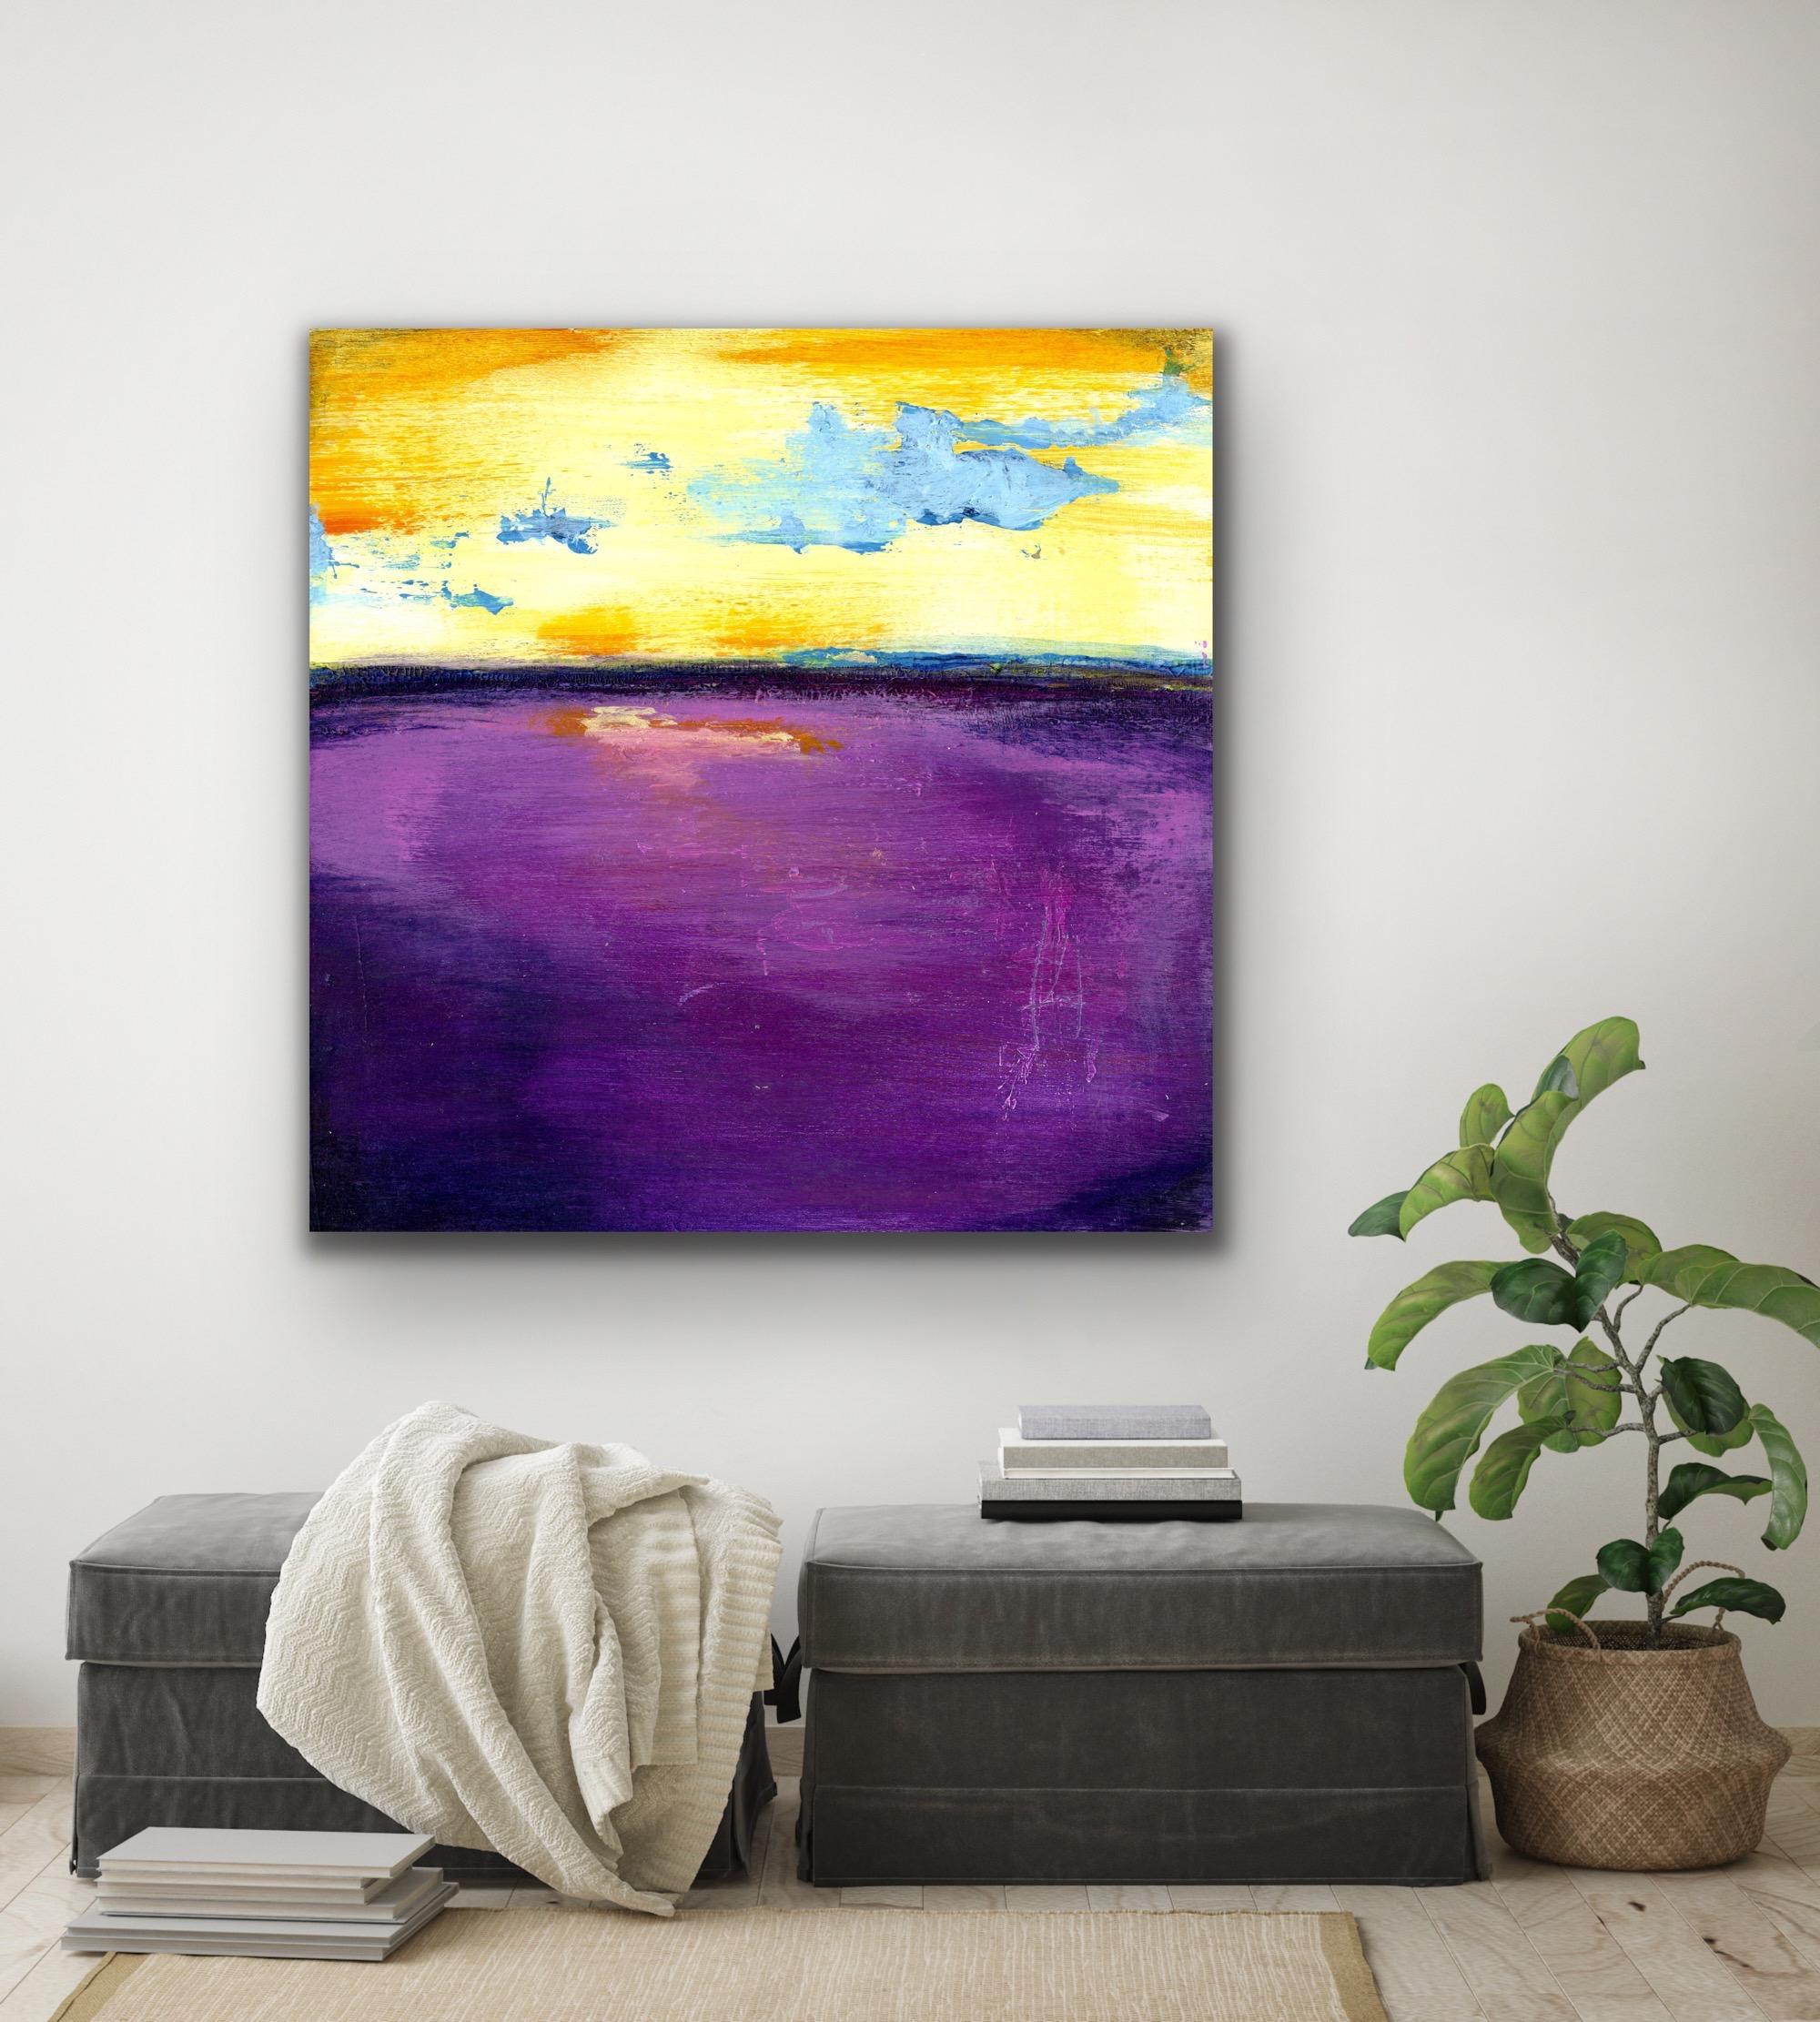 Modern Wall Print Art, Abstract Ocean Landscape Giclee, Limited Edition Signed For Sale 2